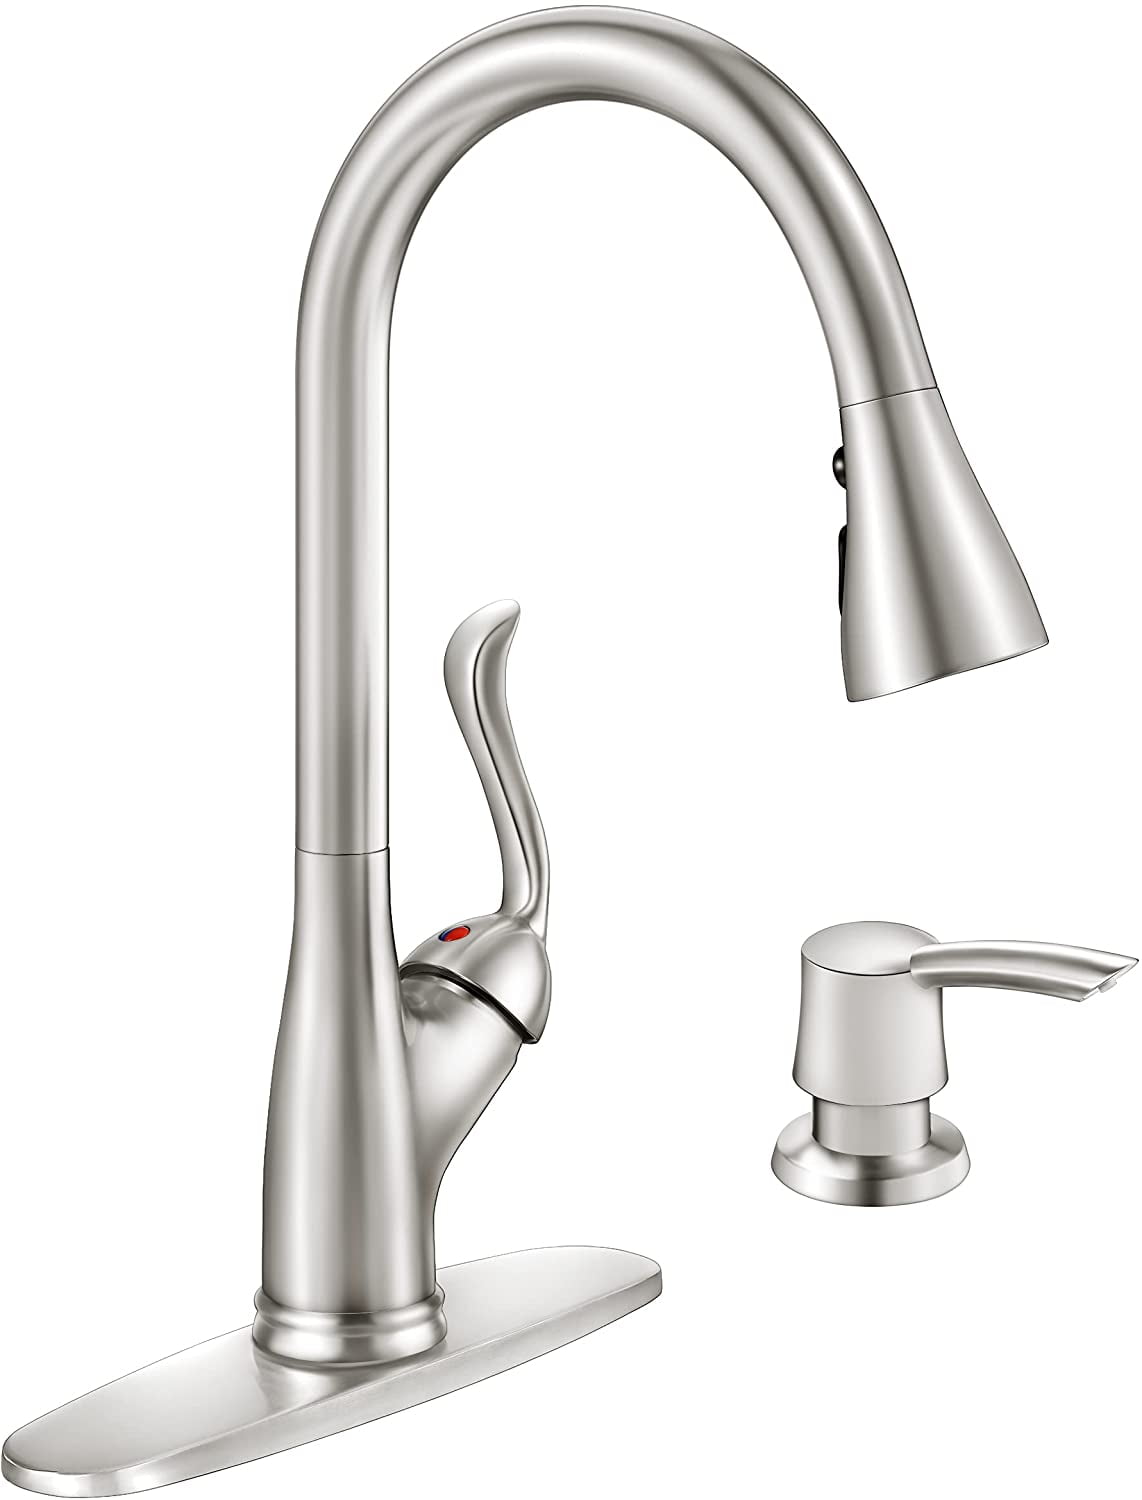 Brushed Nickel for sale online Appaso GG-K123-BN Single Handle Pull Down Kitchen Faucet 